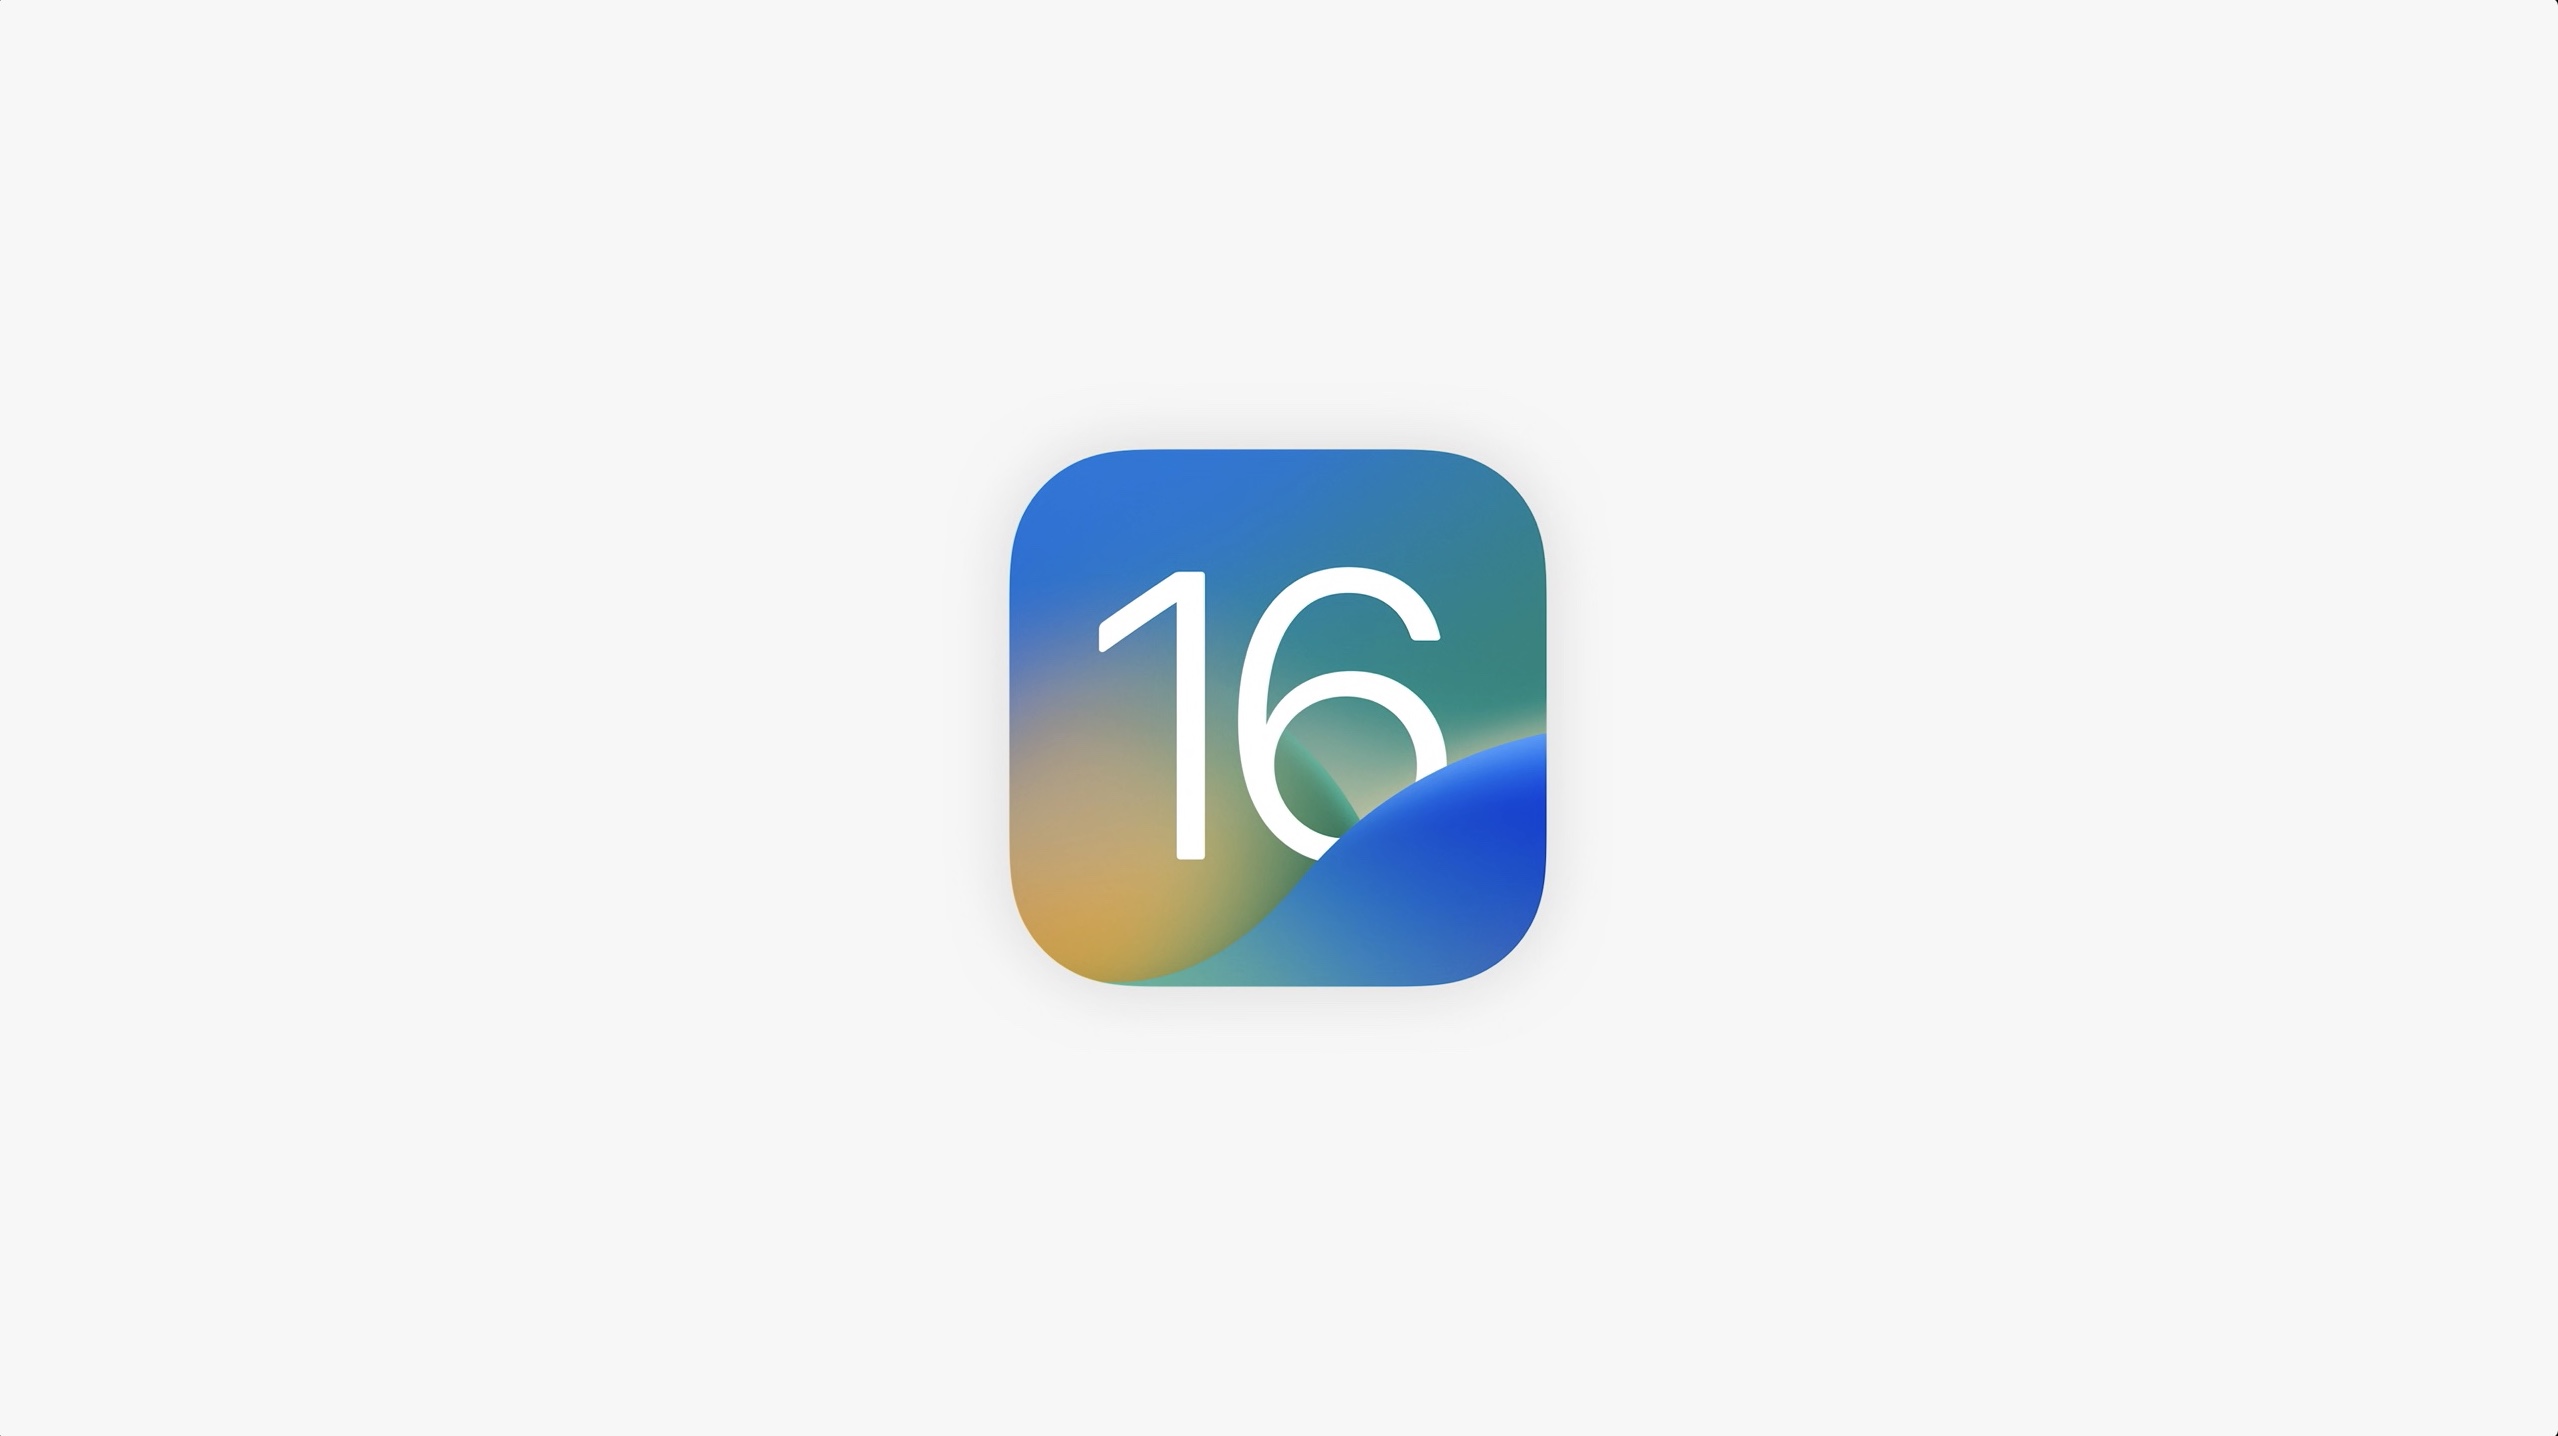 iOS 16.3 arriving around February and March 2023 to coincide with Mac releases